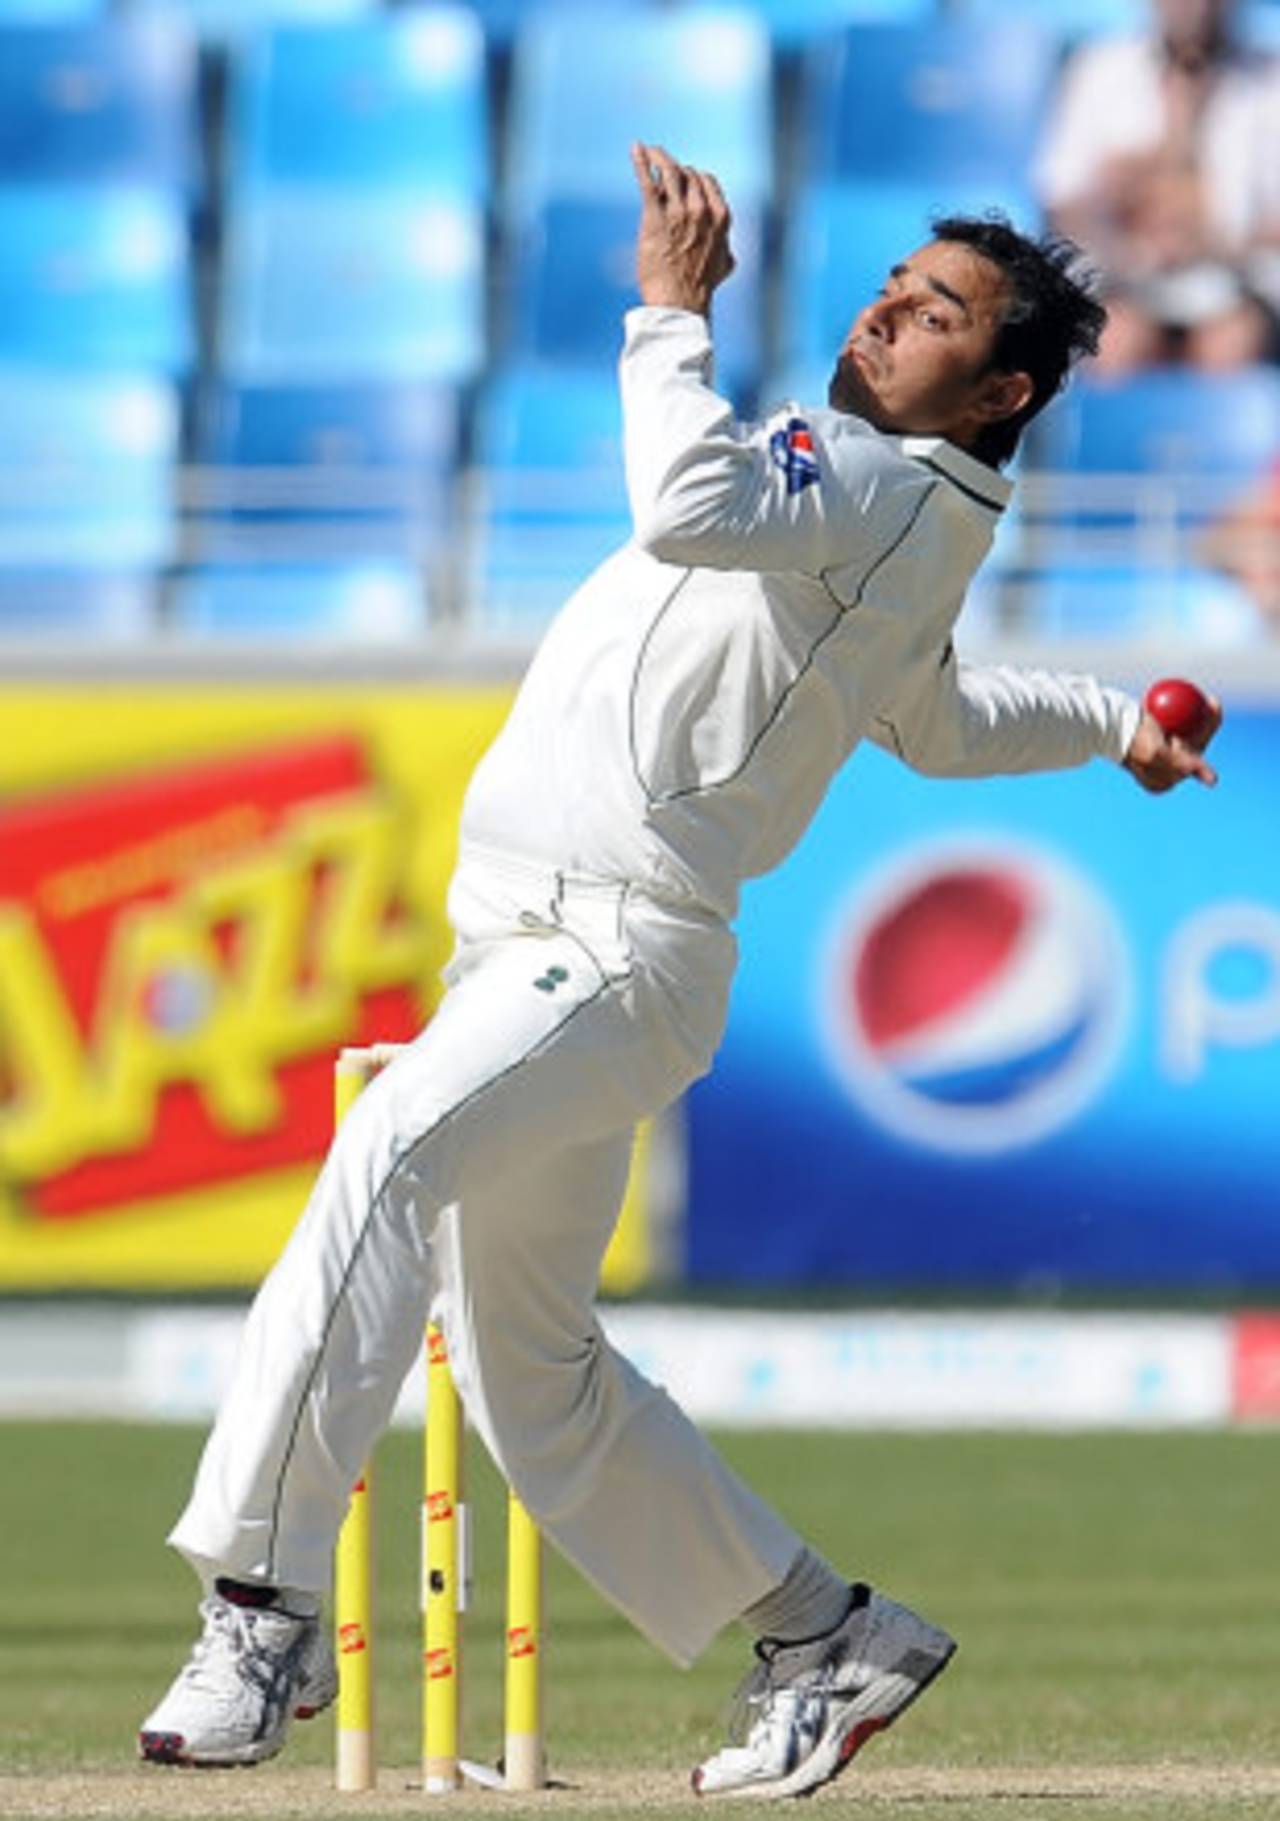 Saeed Ajmal was the leading wicket-taker during the last Sri Lanka-Pakistan Test series in the UAE&nbsp;&nbsp;&bull;&nbsp;&nbsp;Getty Images